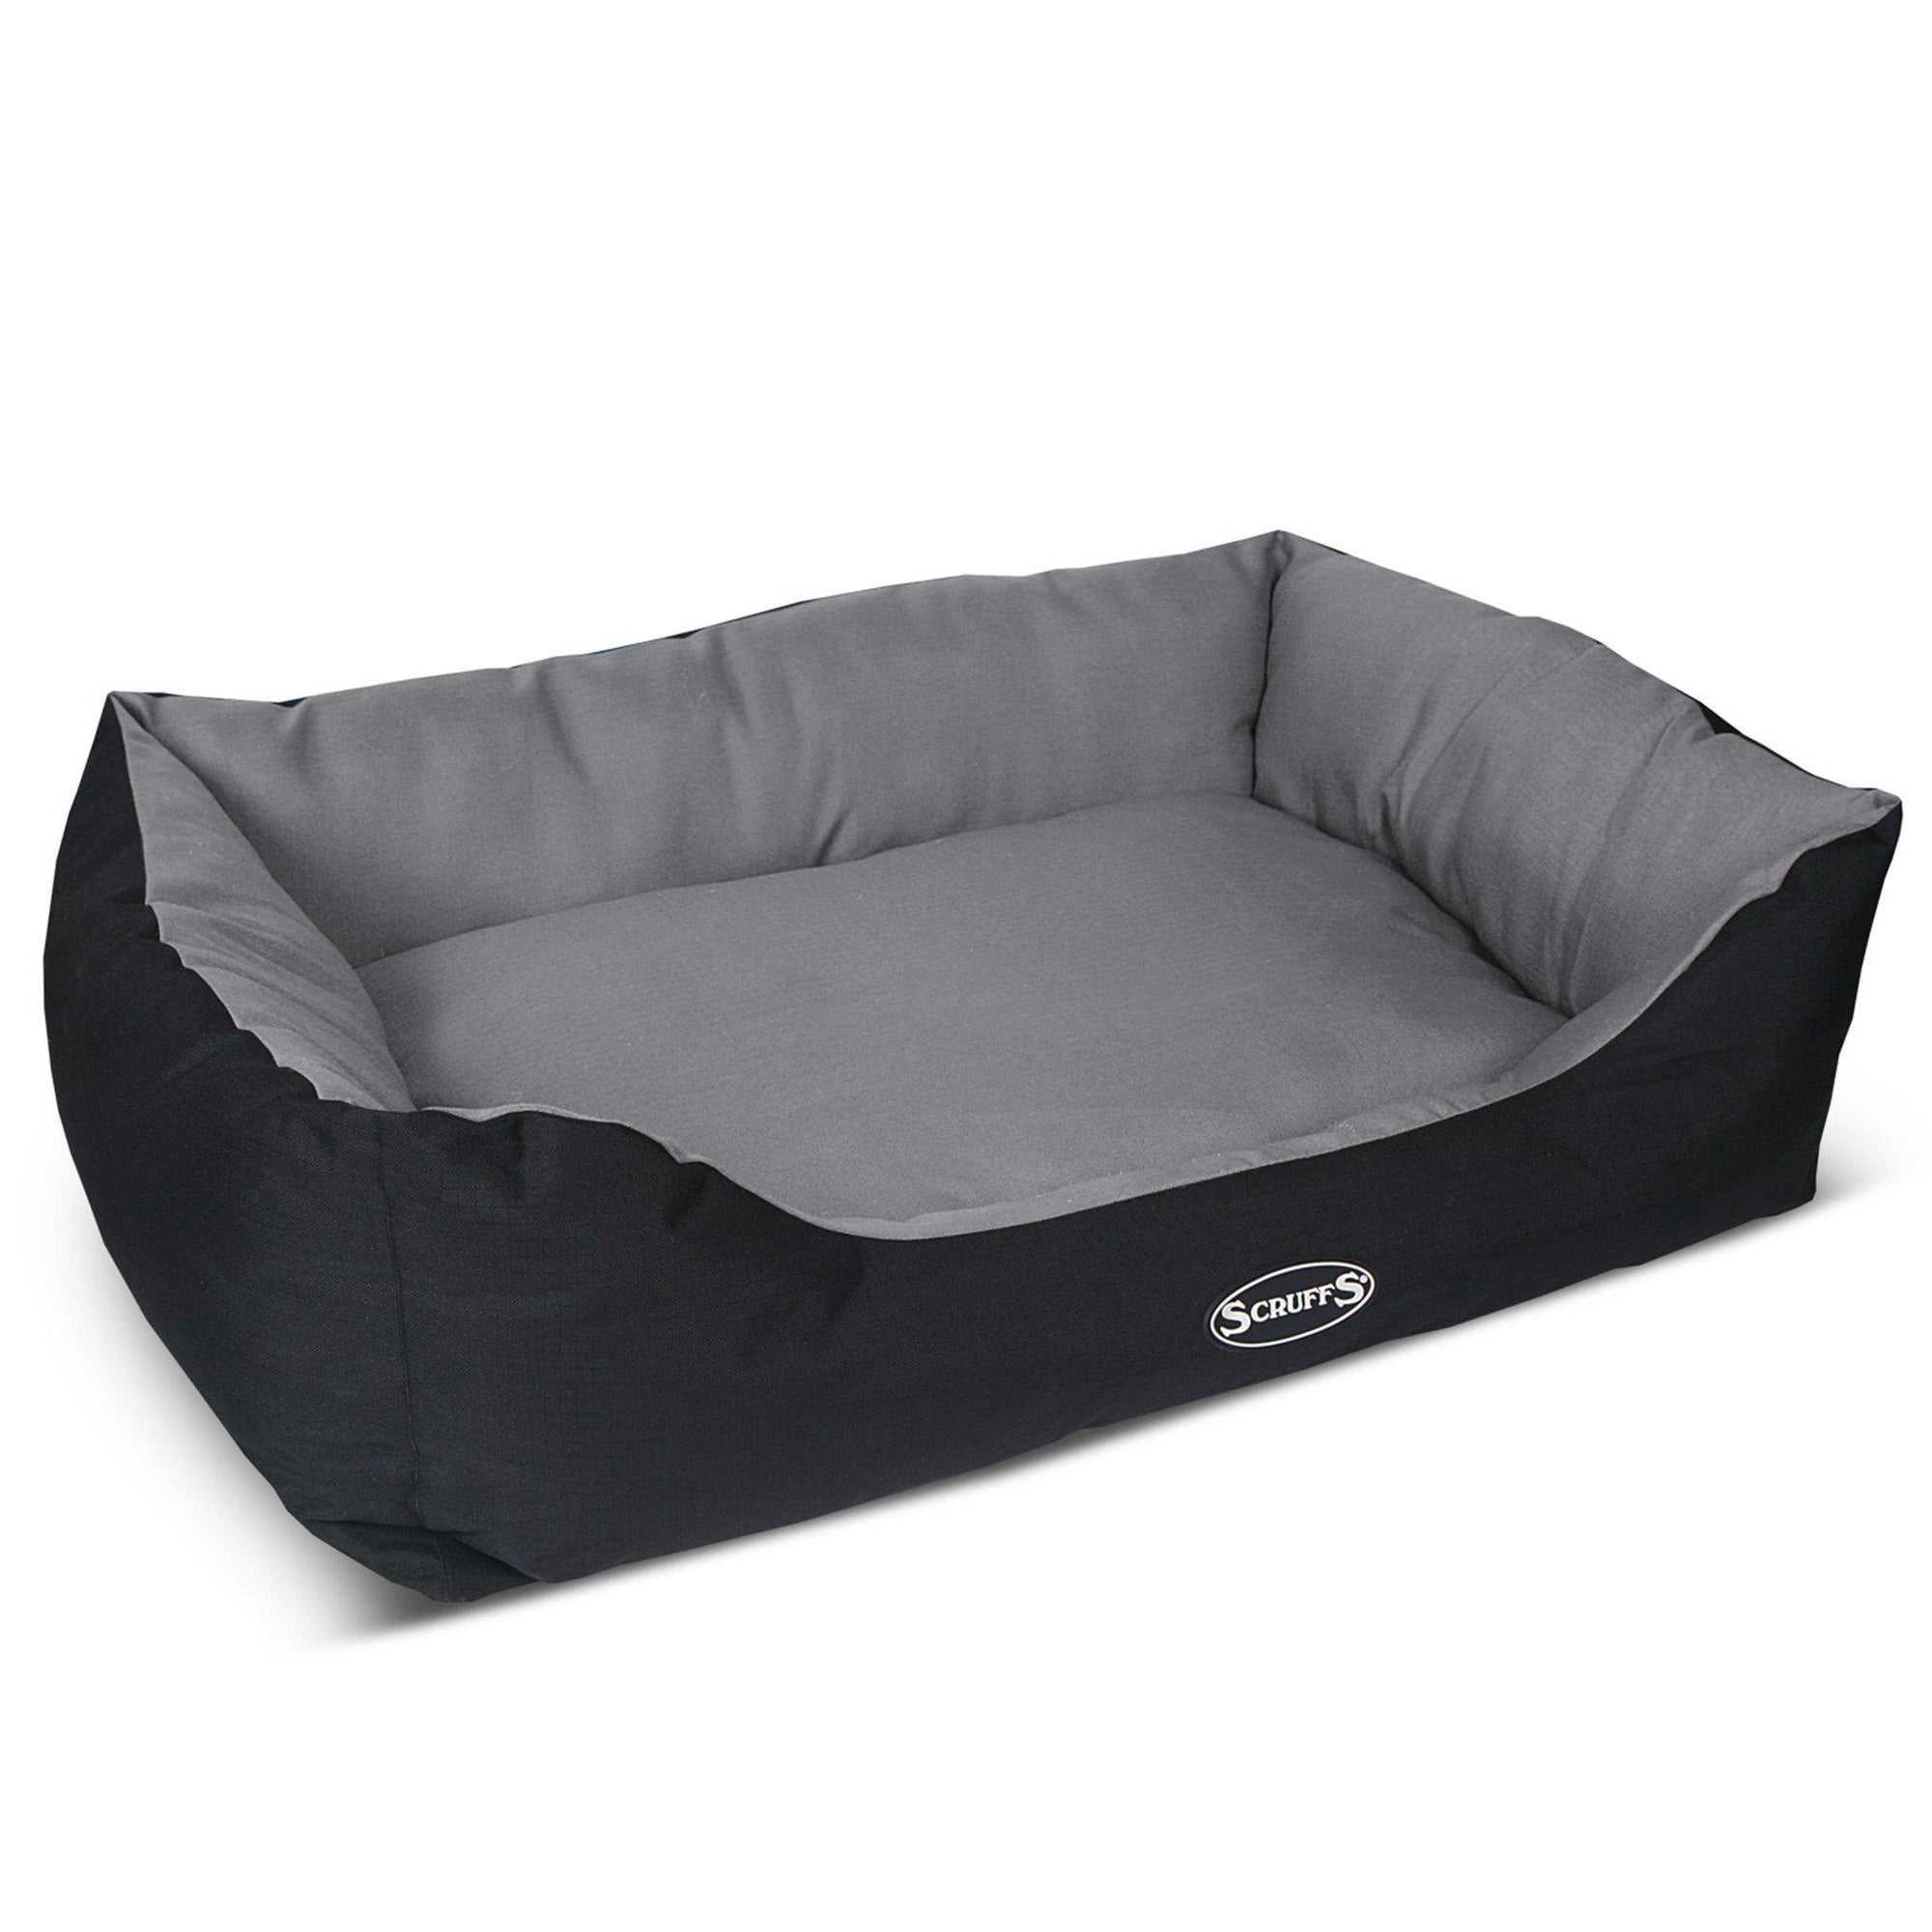 Expedition Box Bed - ComfyPet Products